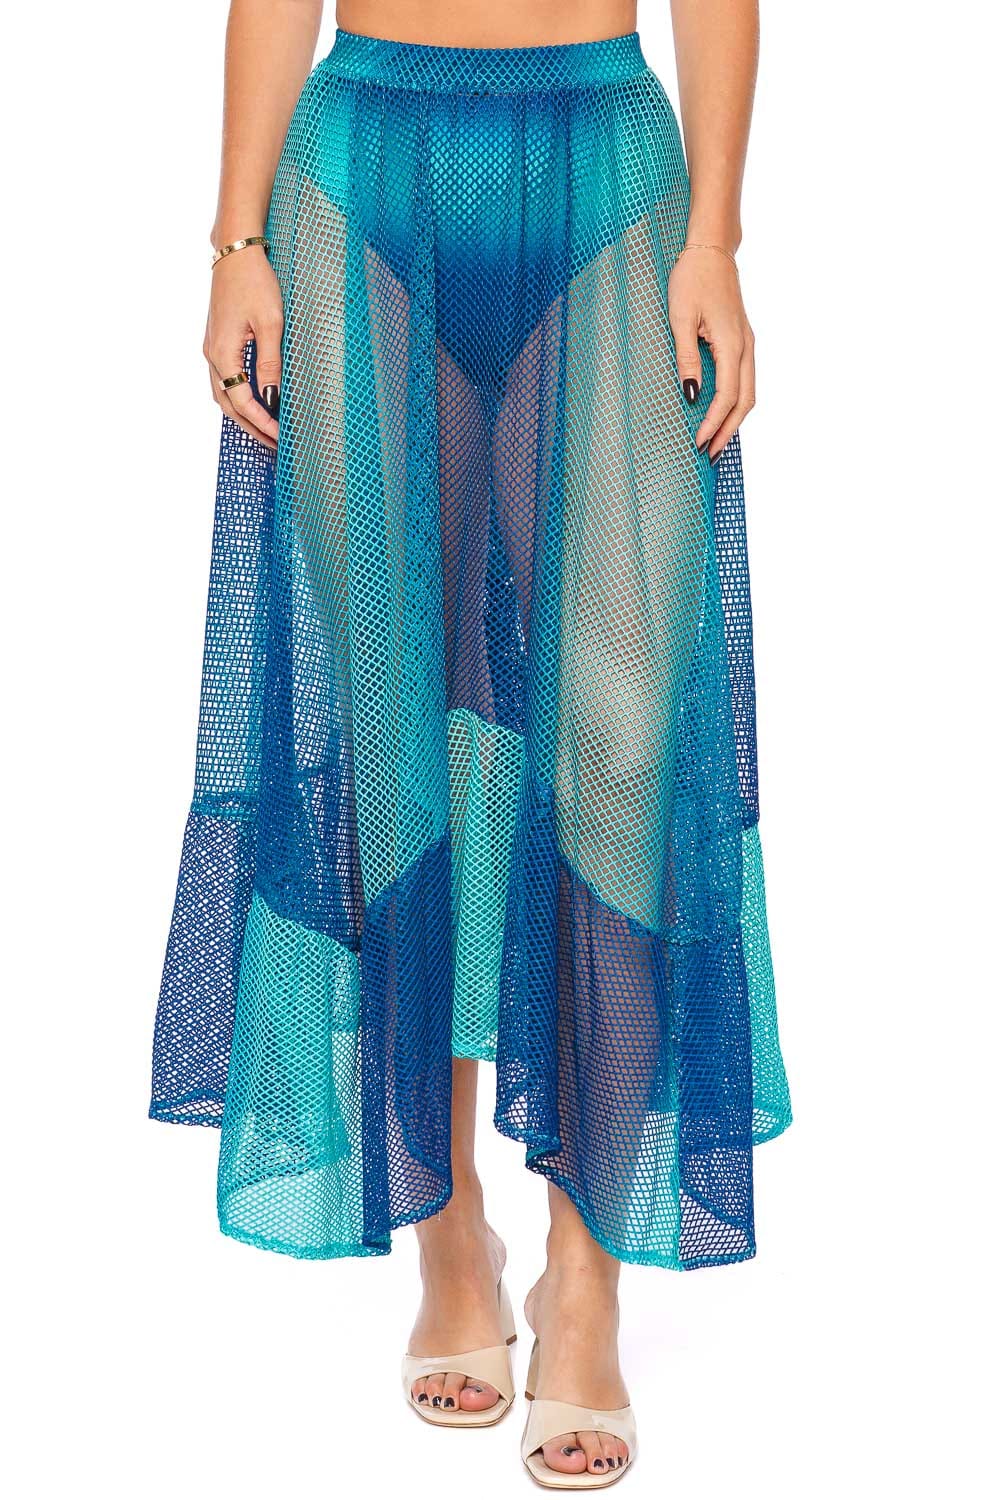 PatBO Ombre High Tide Netted Beach Skirt